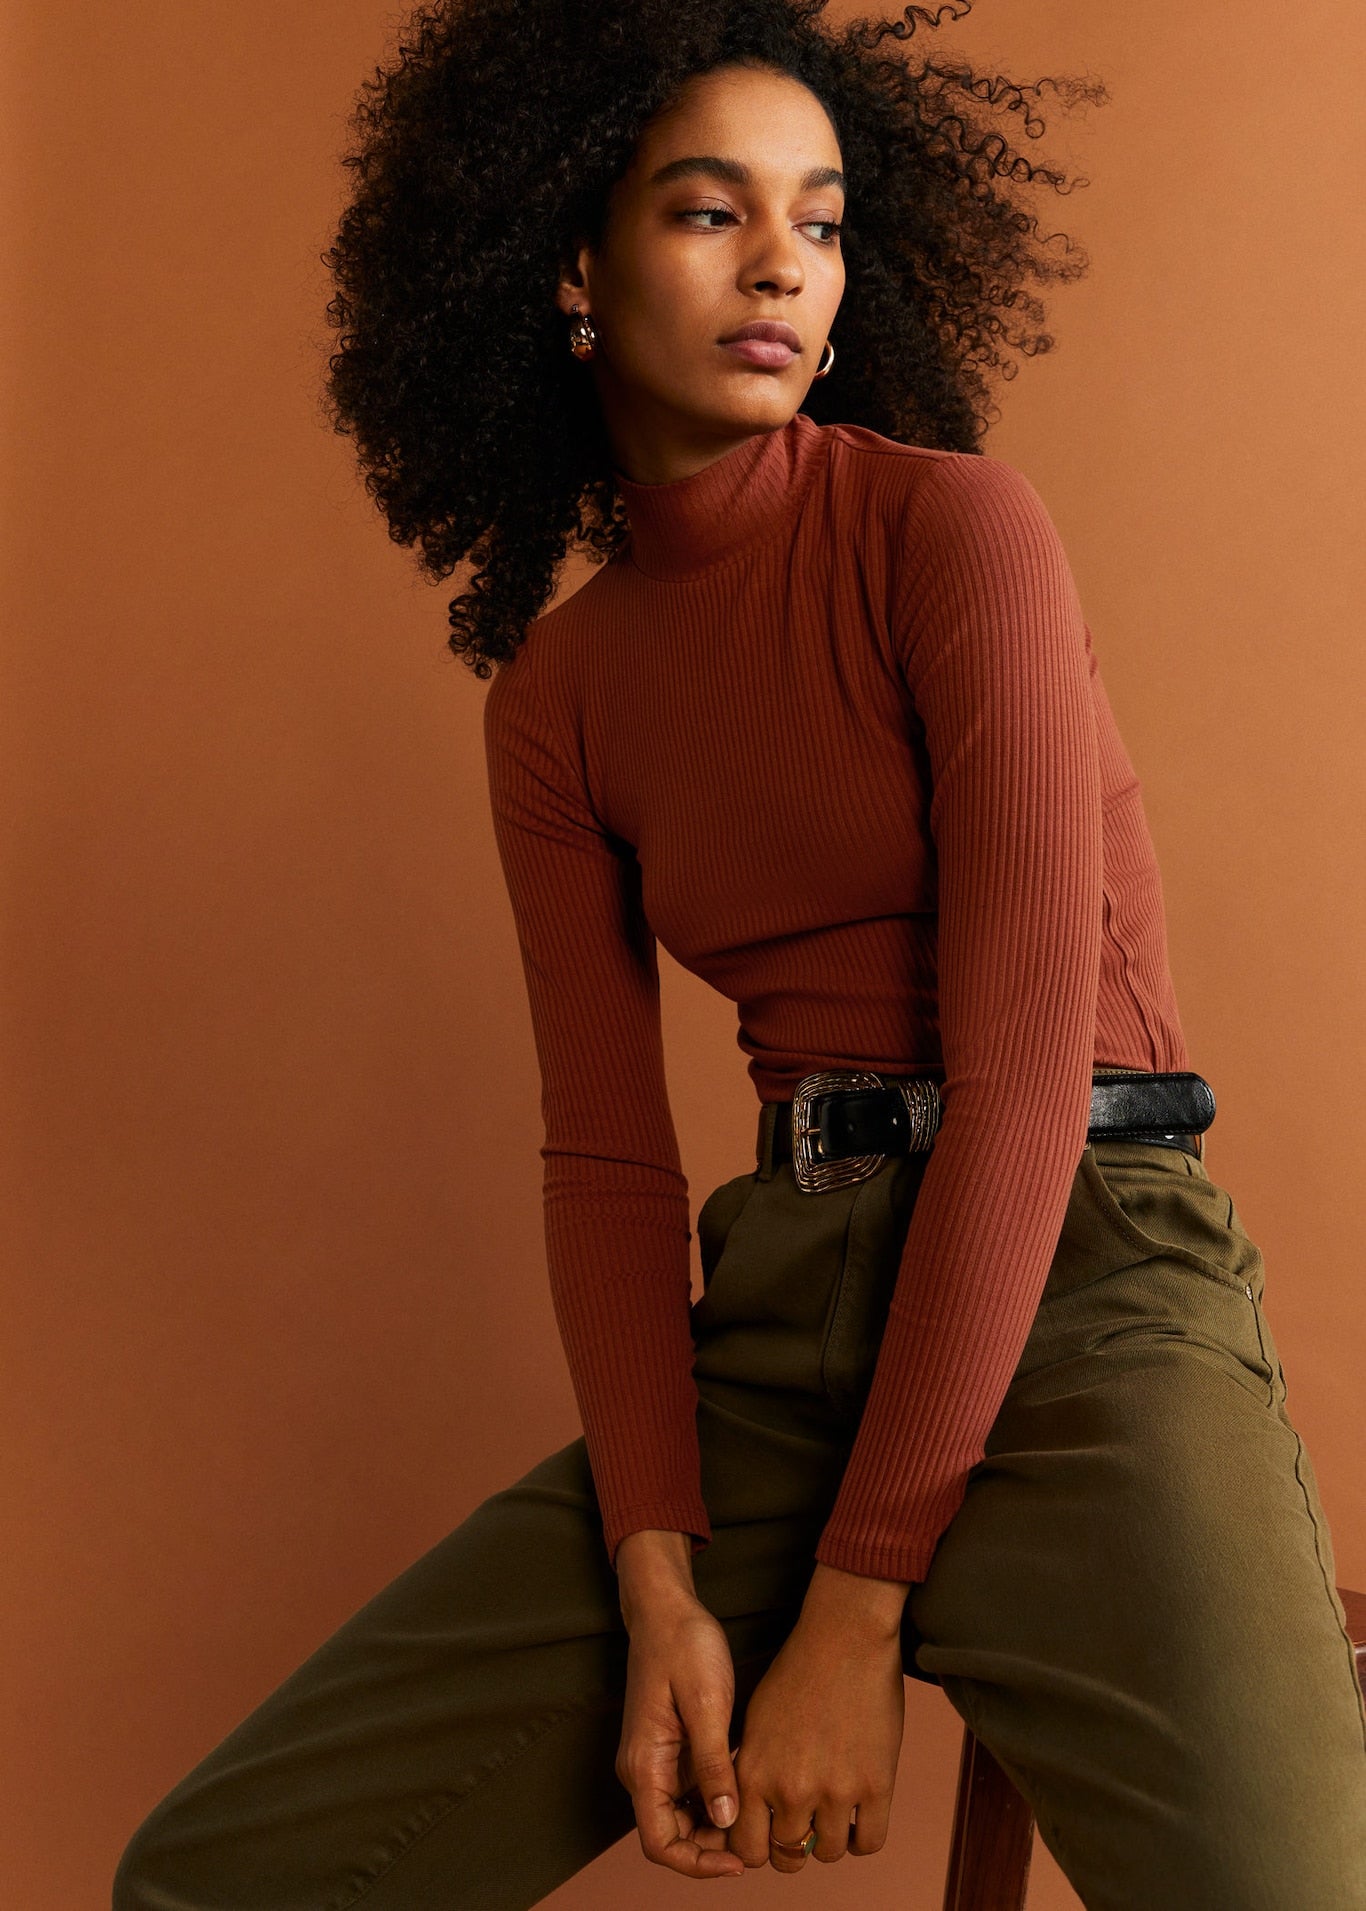 If You Don't Buy Any Other Turtlenecks This Season, Grab These | Essence